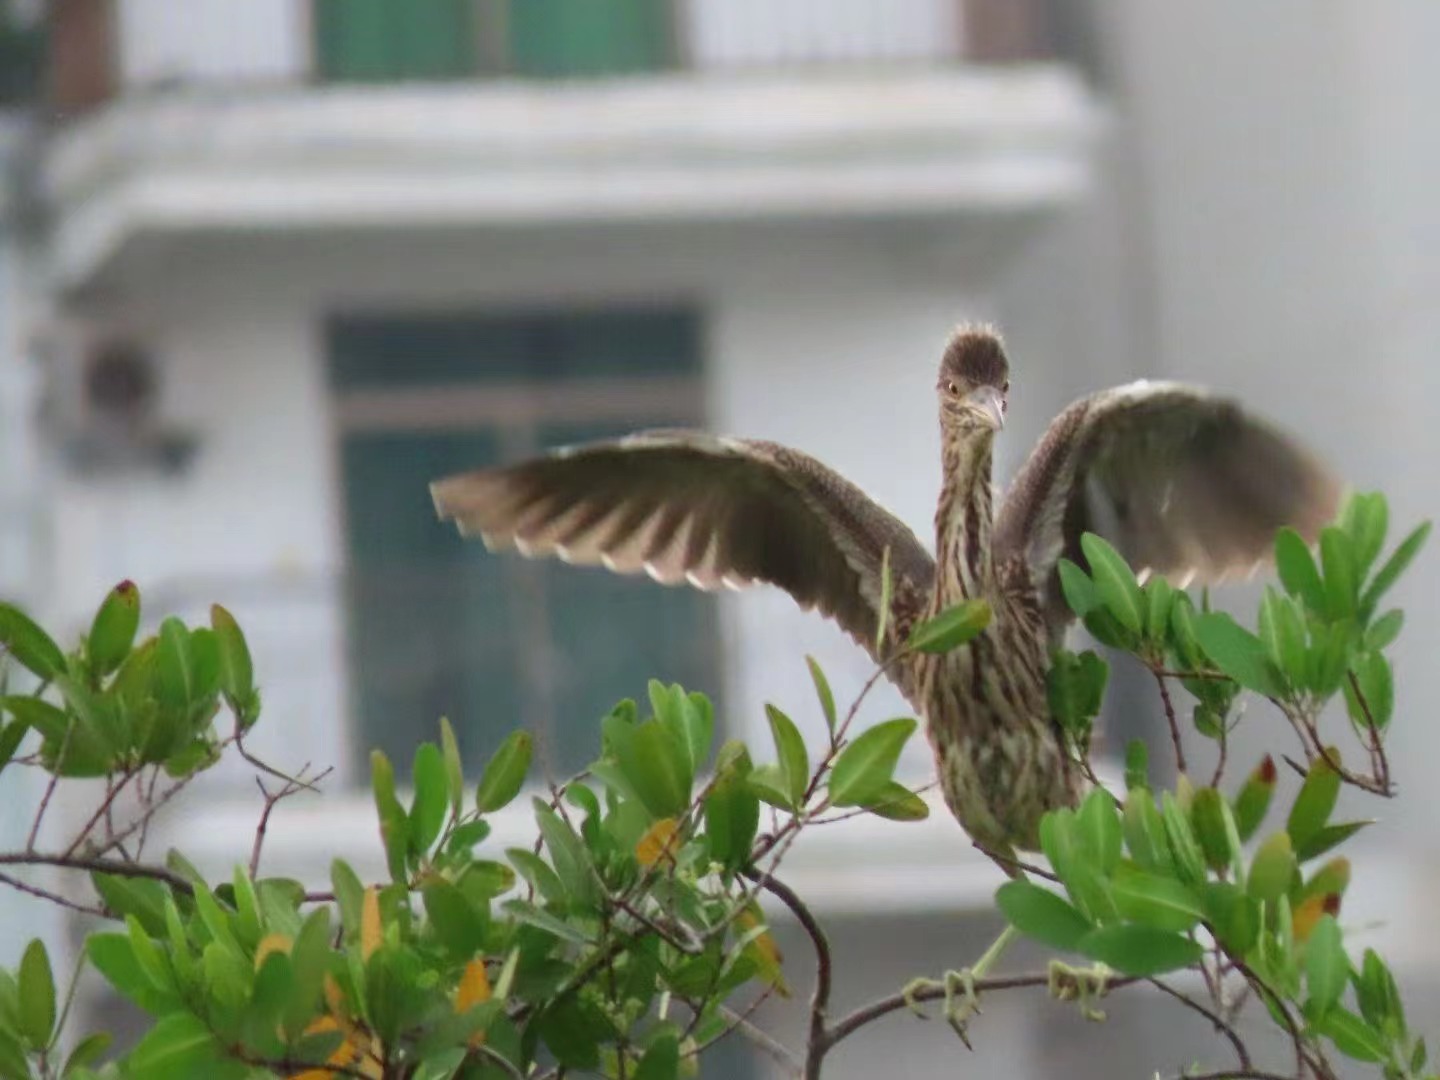 University campus welcomes new members of bird family in Hainan